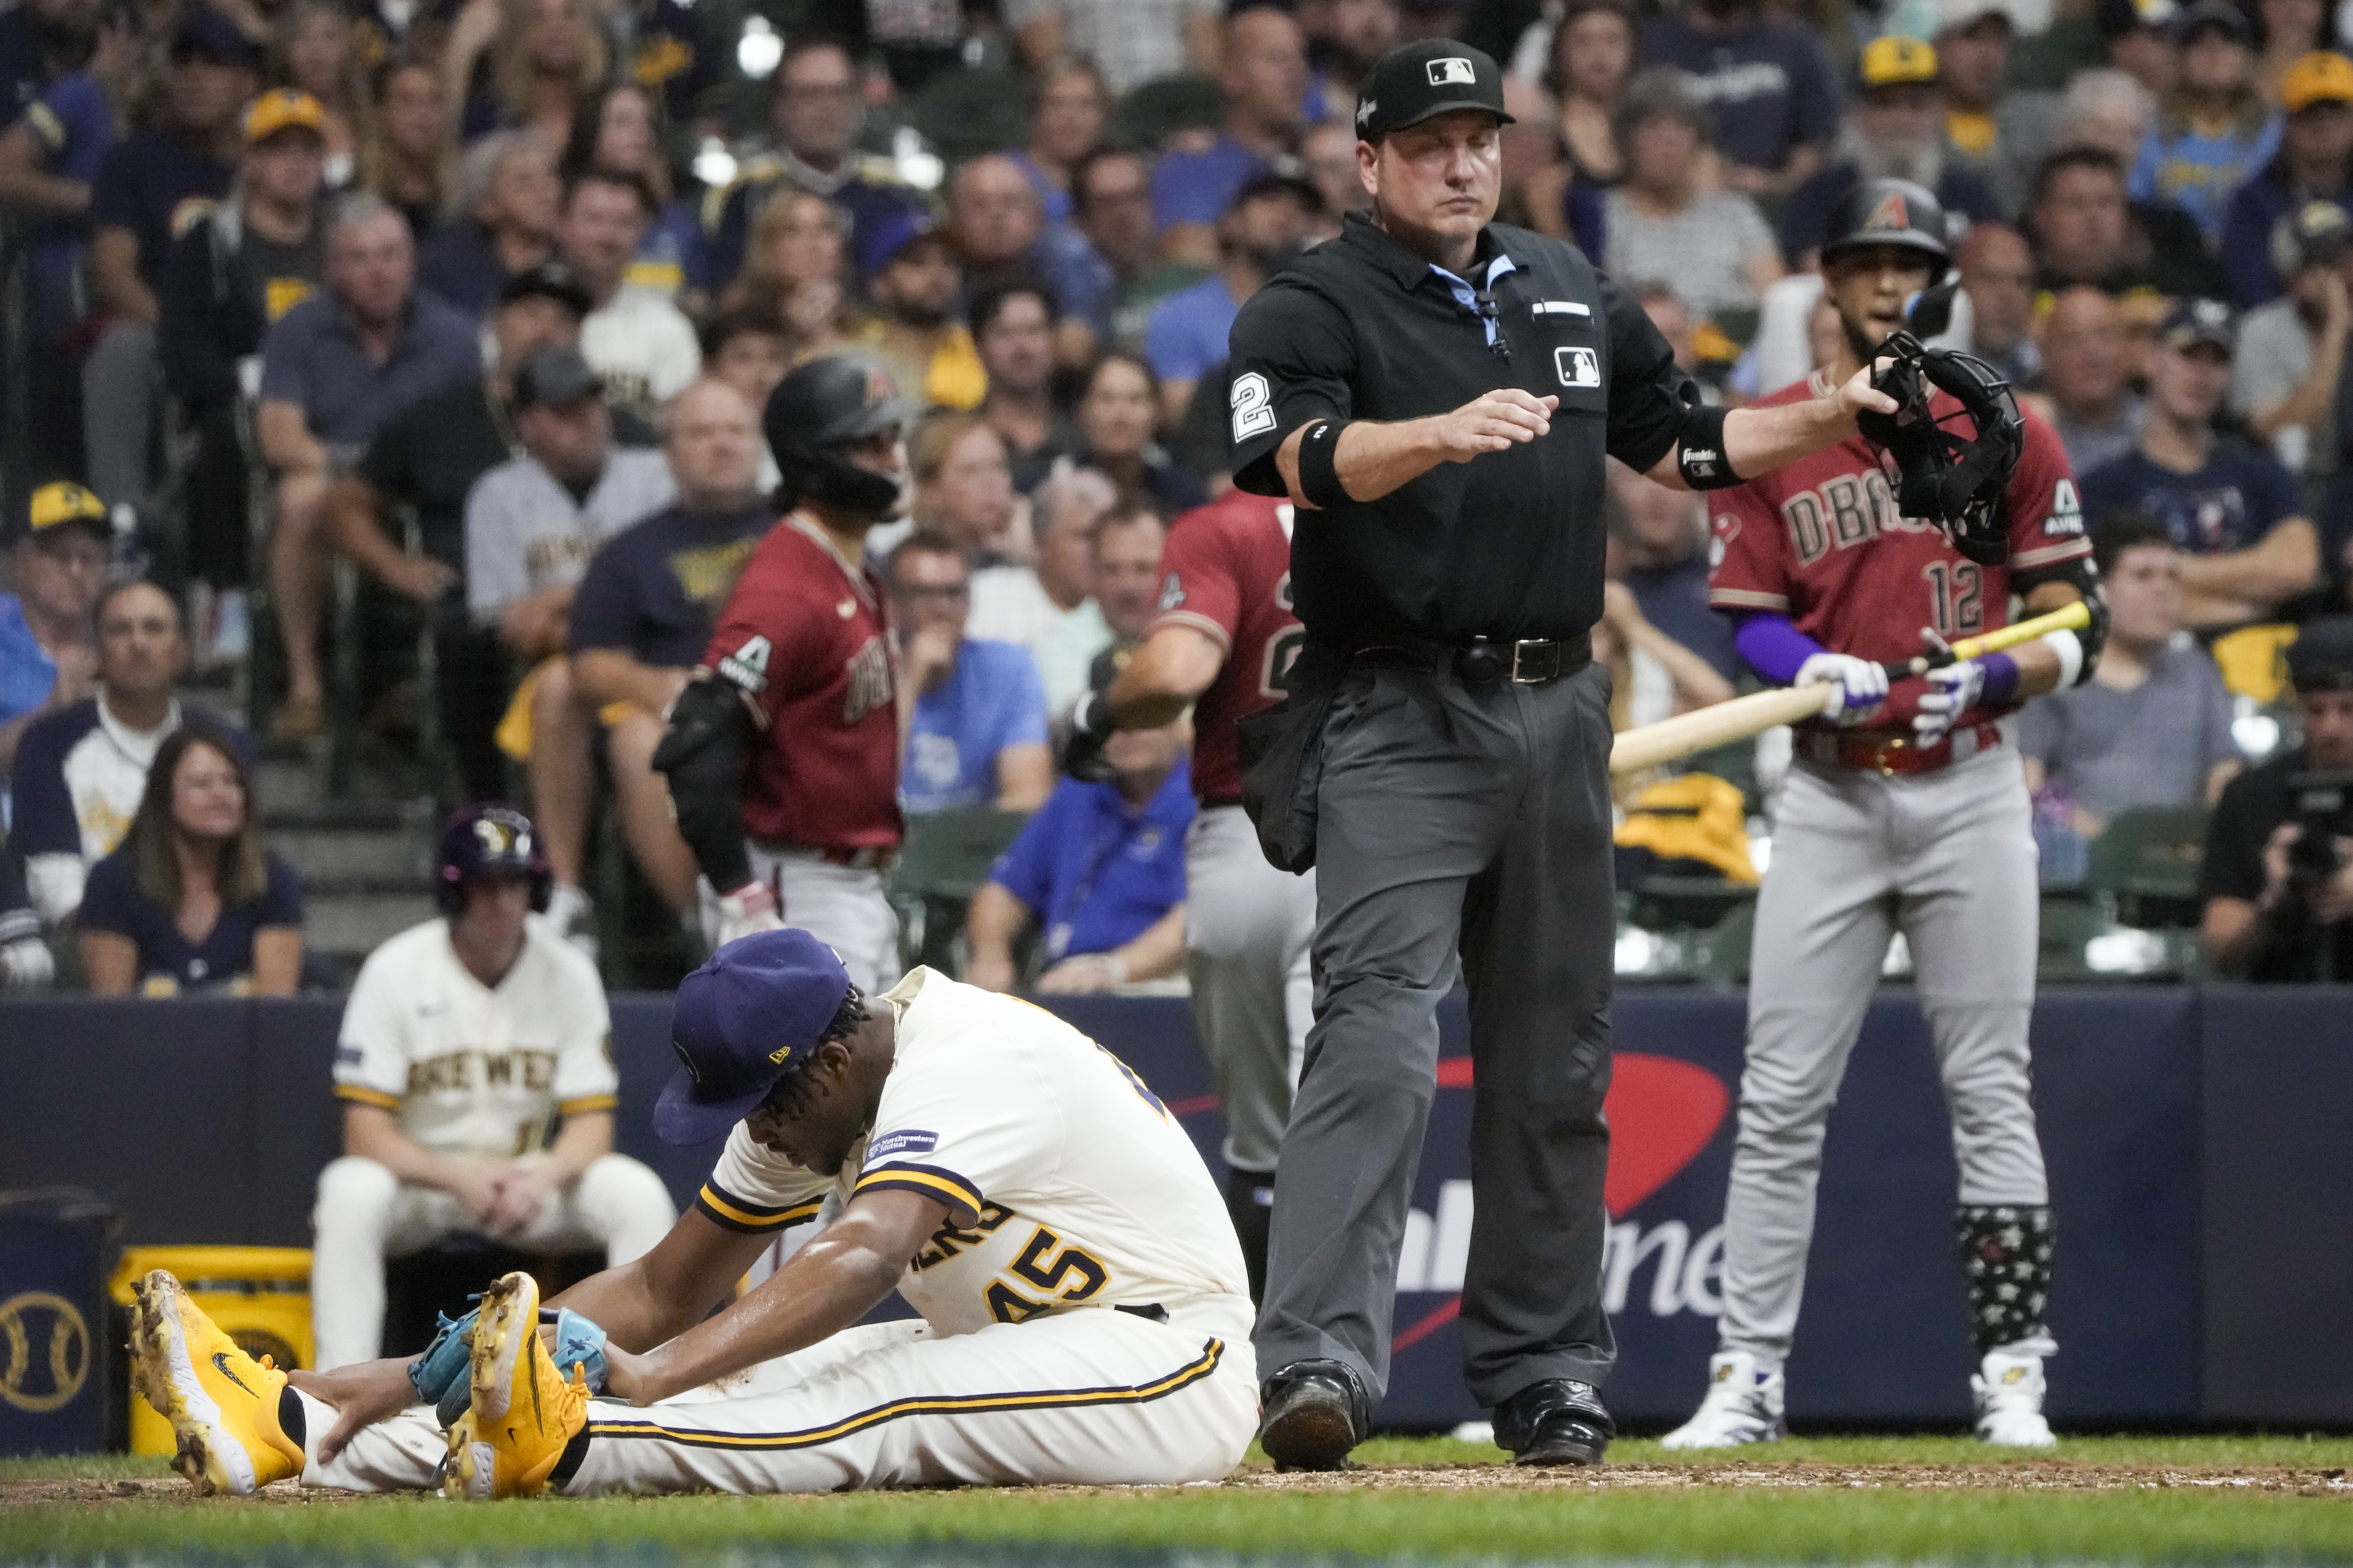 Brewers eliminated from playoffs with 5-2 loss to Diamondbacks